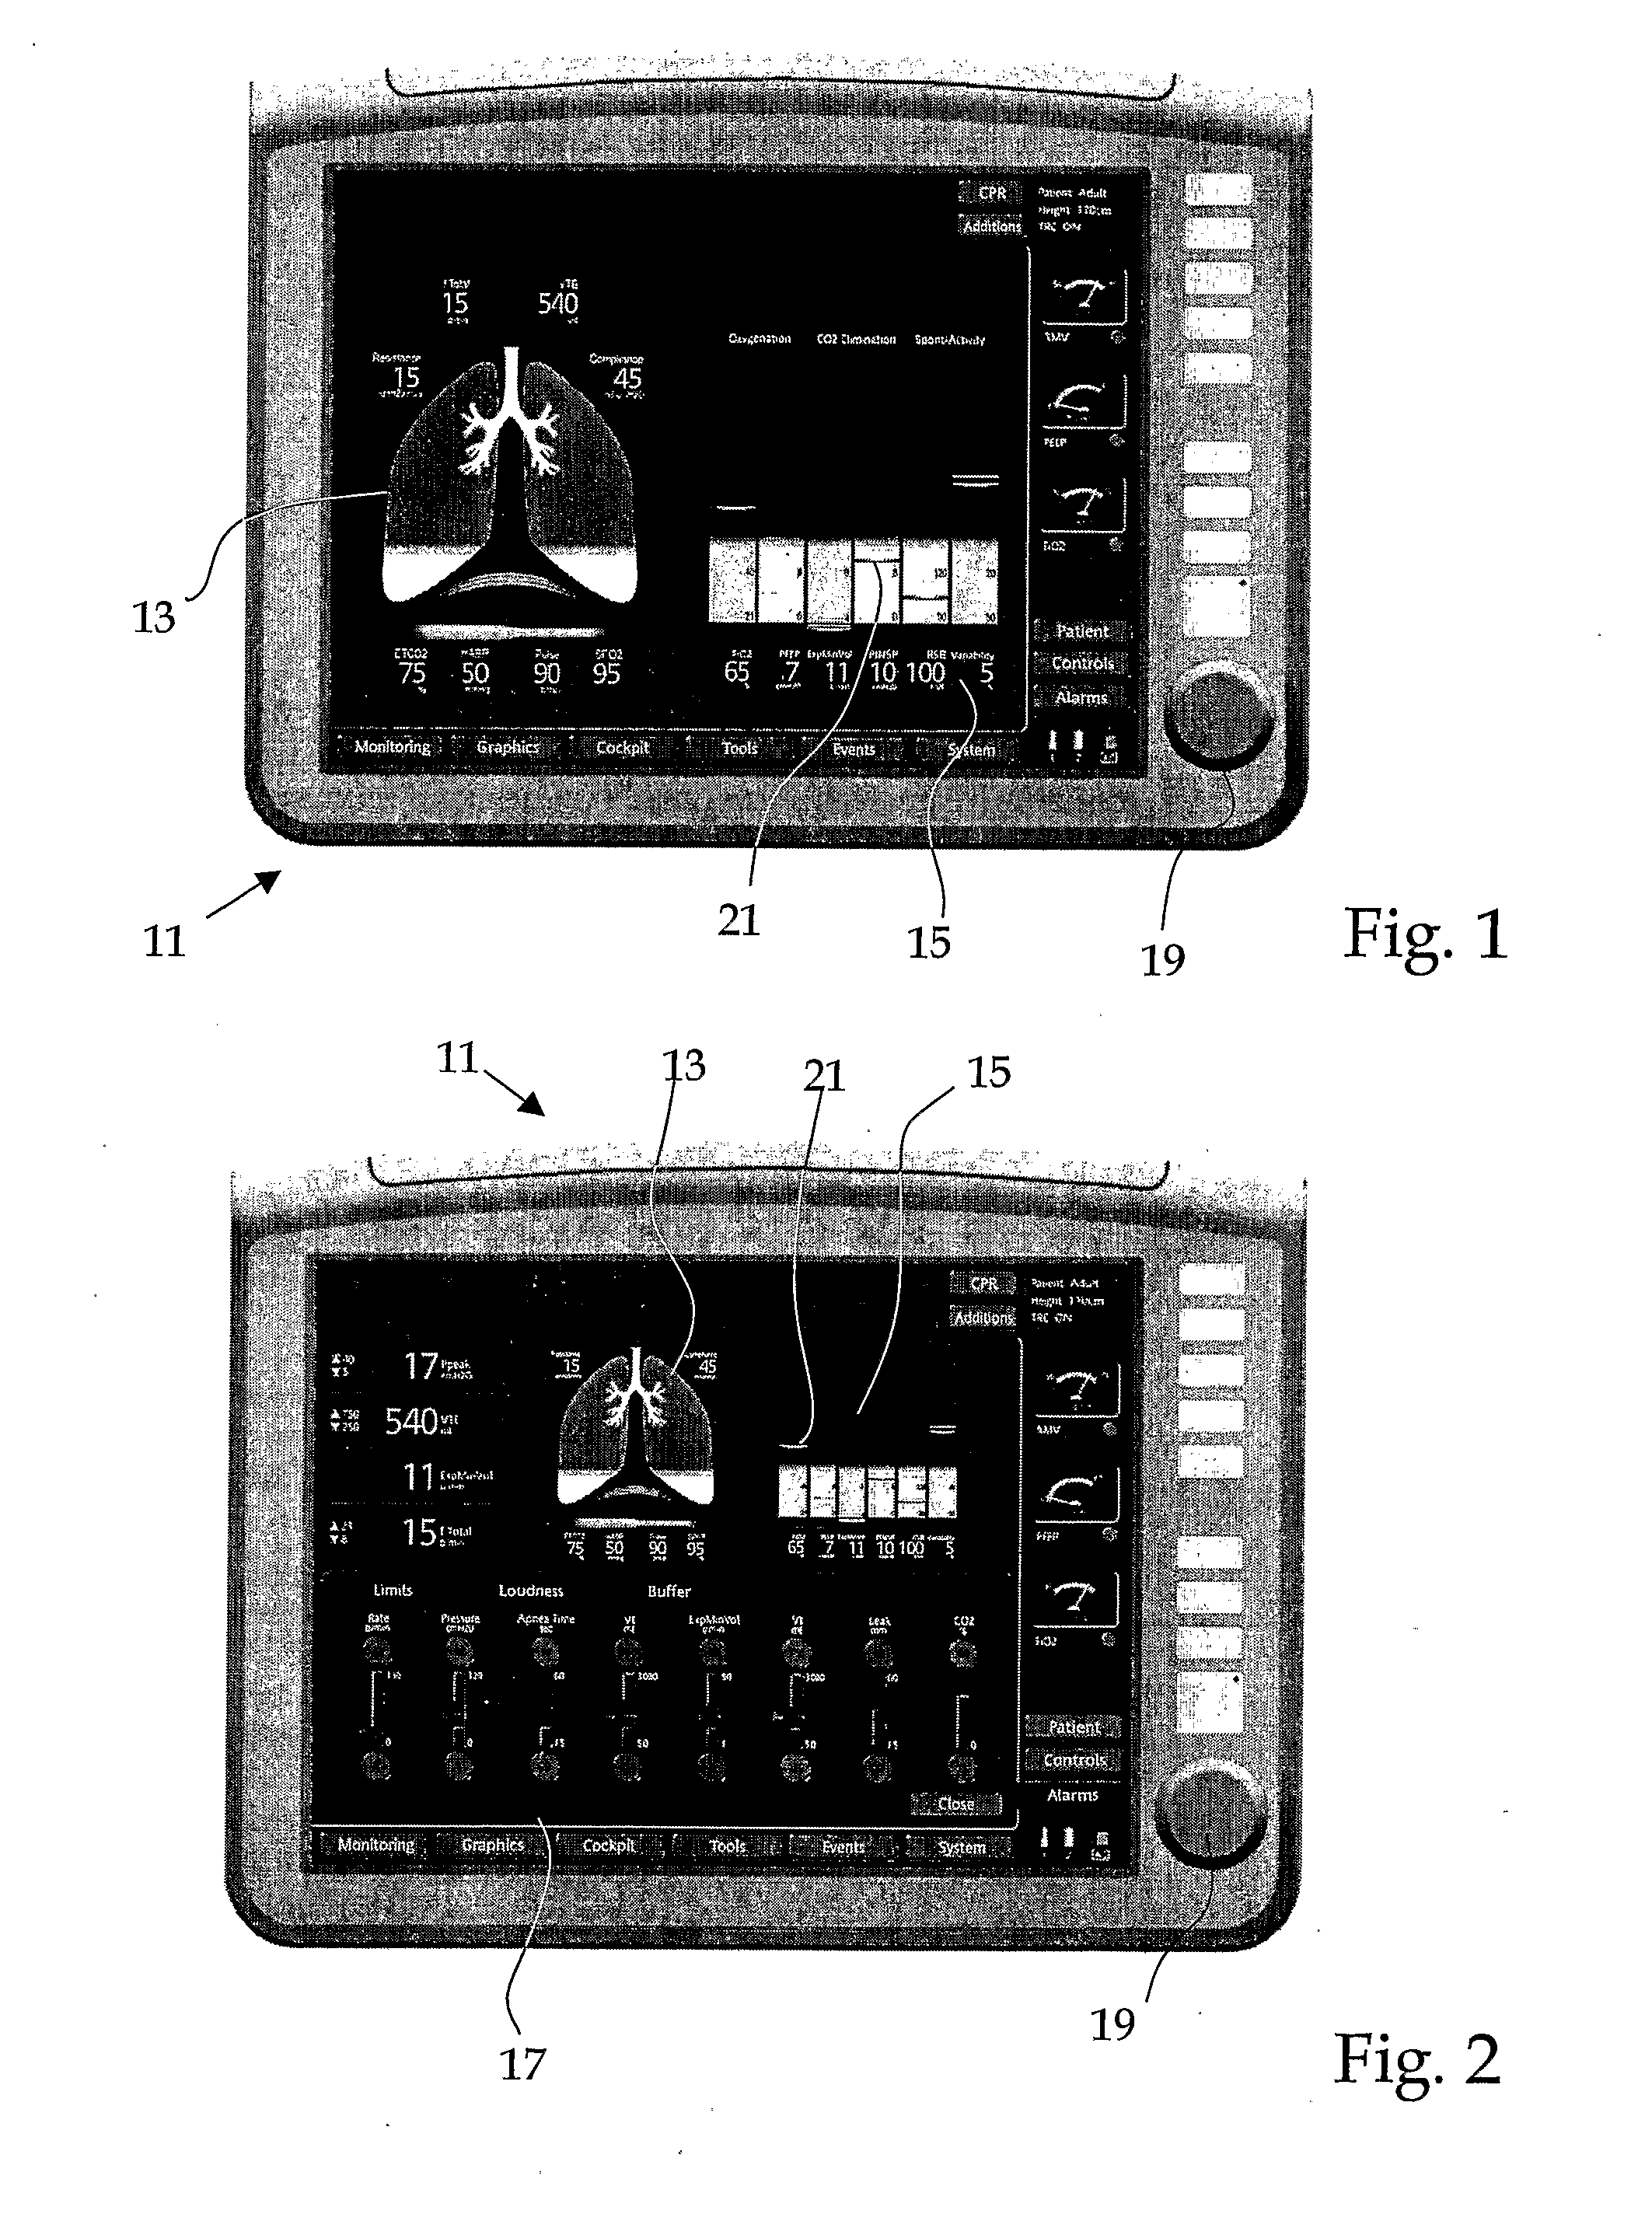 Method and a device for simplifying a diagnostic assessment of a mechanically ventilated patient